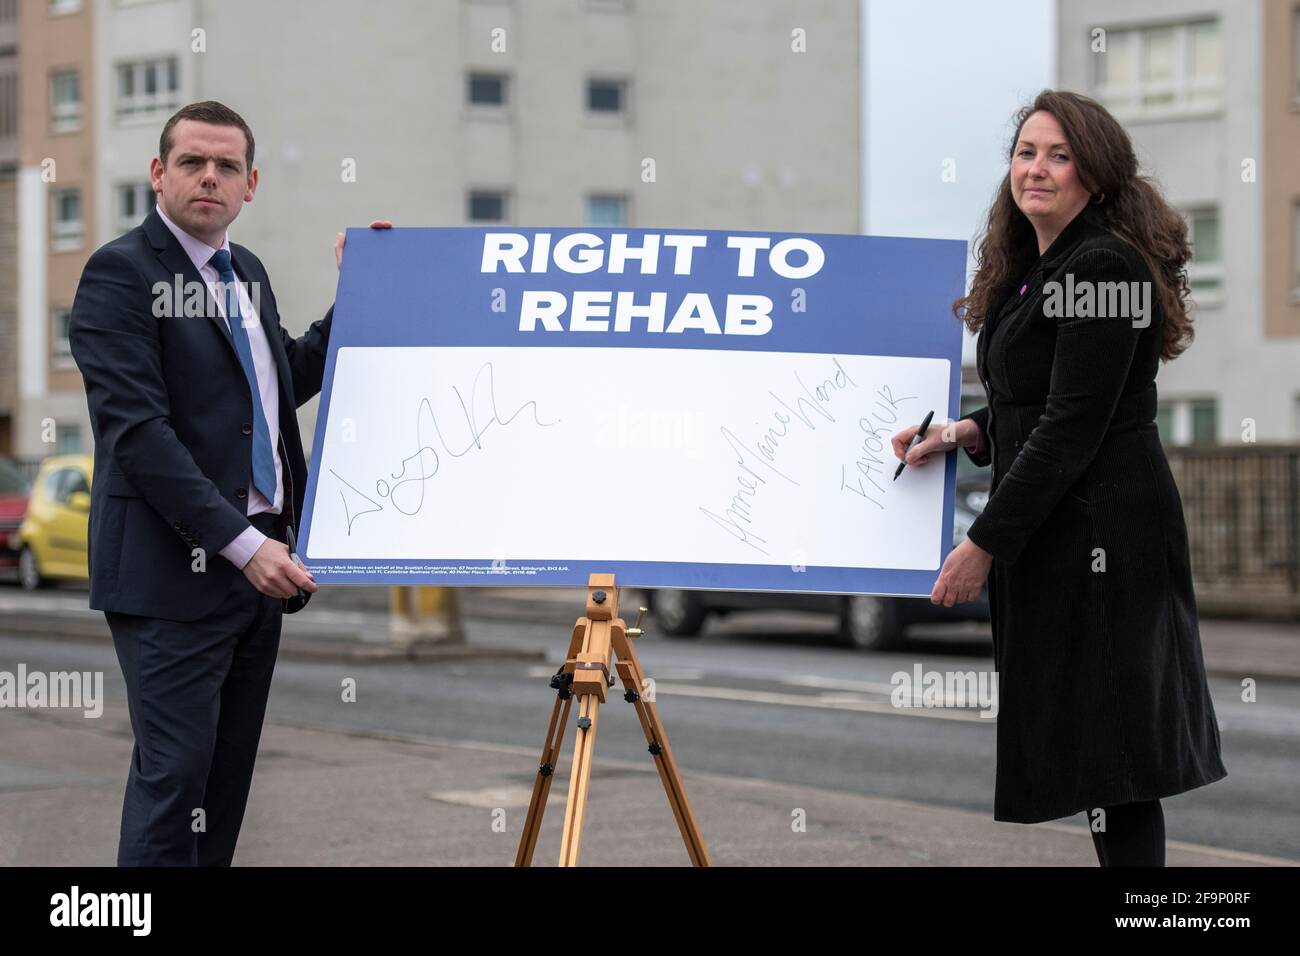 Glasgow, Scotland, UK. 20 April 2021. PICTURED: (left) Douglas Ross MP, Scottish Conservative and Unionist Party Leader, (right) Annemarie Ward, Advocacy Activist for those suffering and recovering from addiction and CEO of FAVORUK. Scottish Conservative leader Douglas Ross said: “For too long, the government has taken its eye off the ball, by its own admission. Tackling drug deaths has not been a priority and that has to change now. Too many lives have already been lost. Recovery experts have raised the alarm that Scotland's drug deaths figures “undoubtedly will rise” as people still cannot Stock Photo